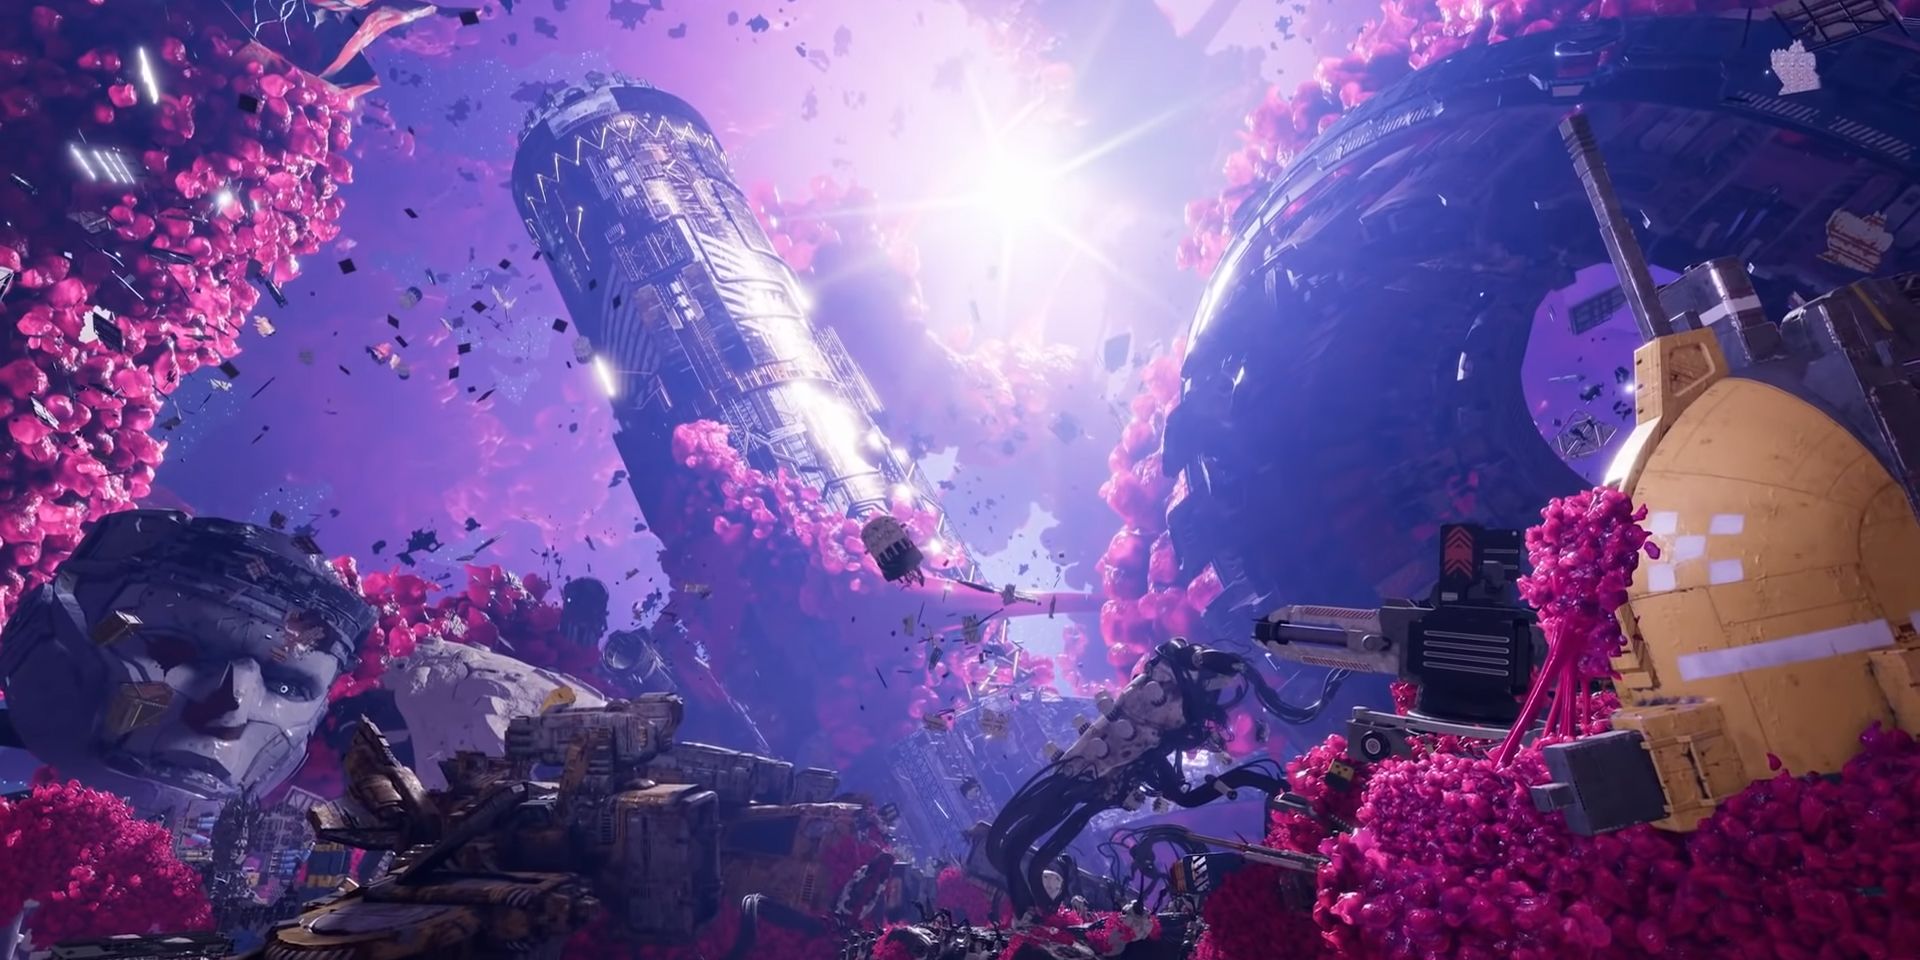 A screenshot showing the scope of the scenery in the Square Enix version of Guardians of the Galaxy